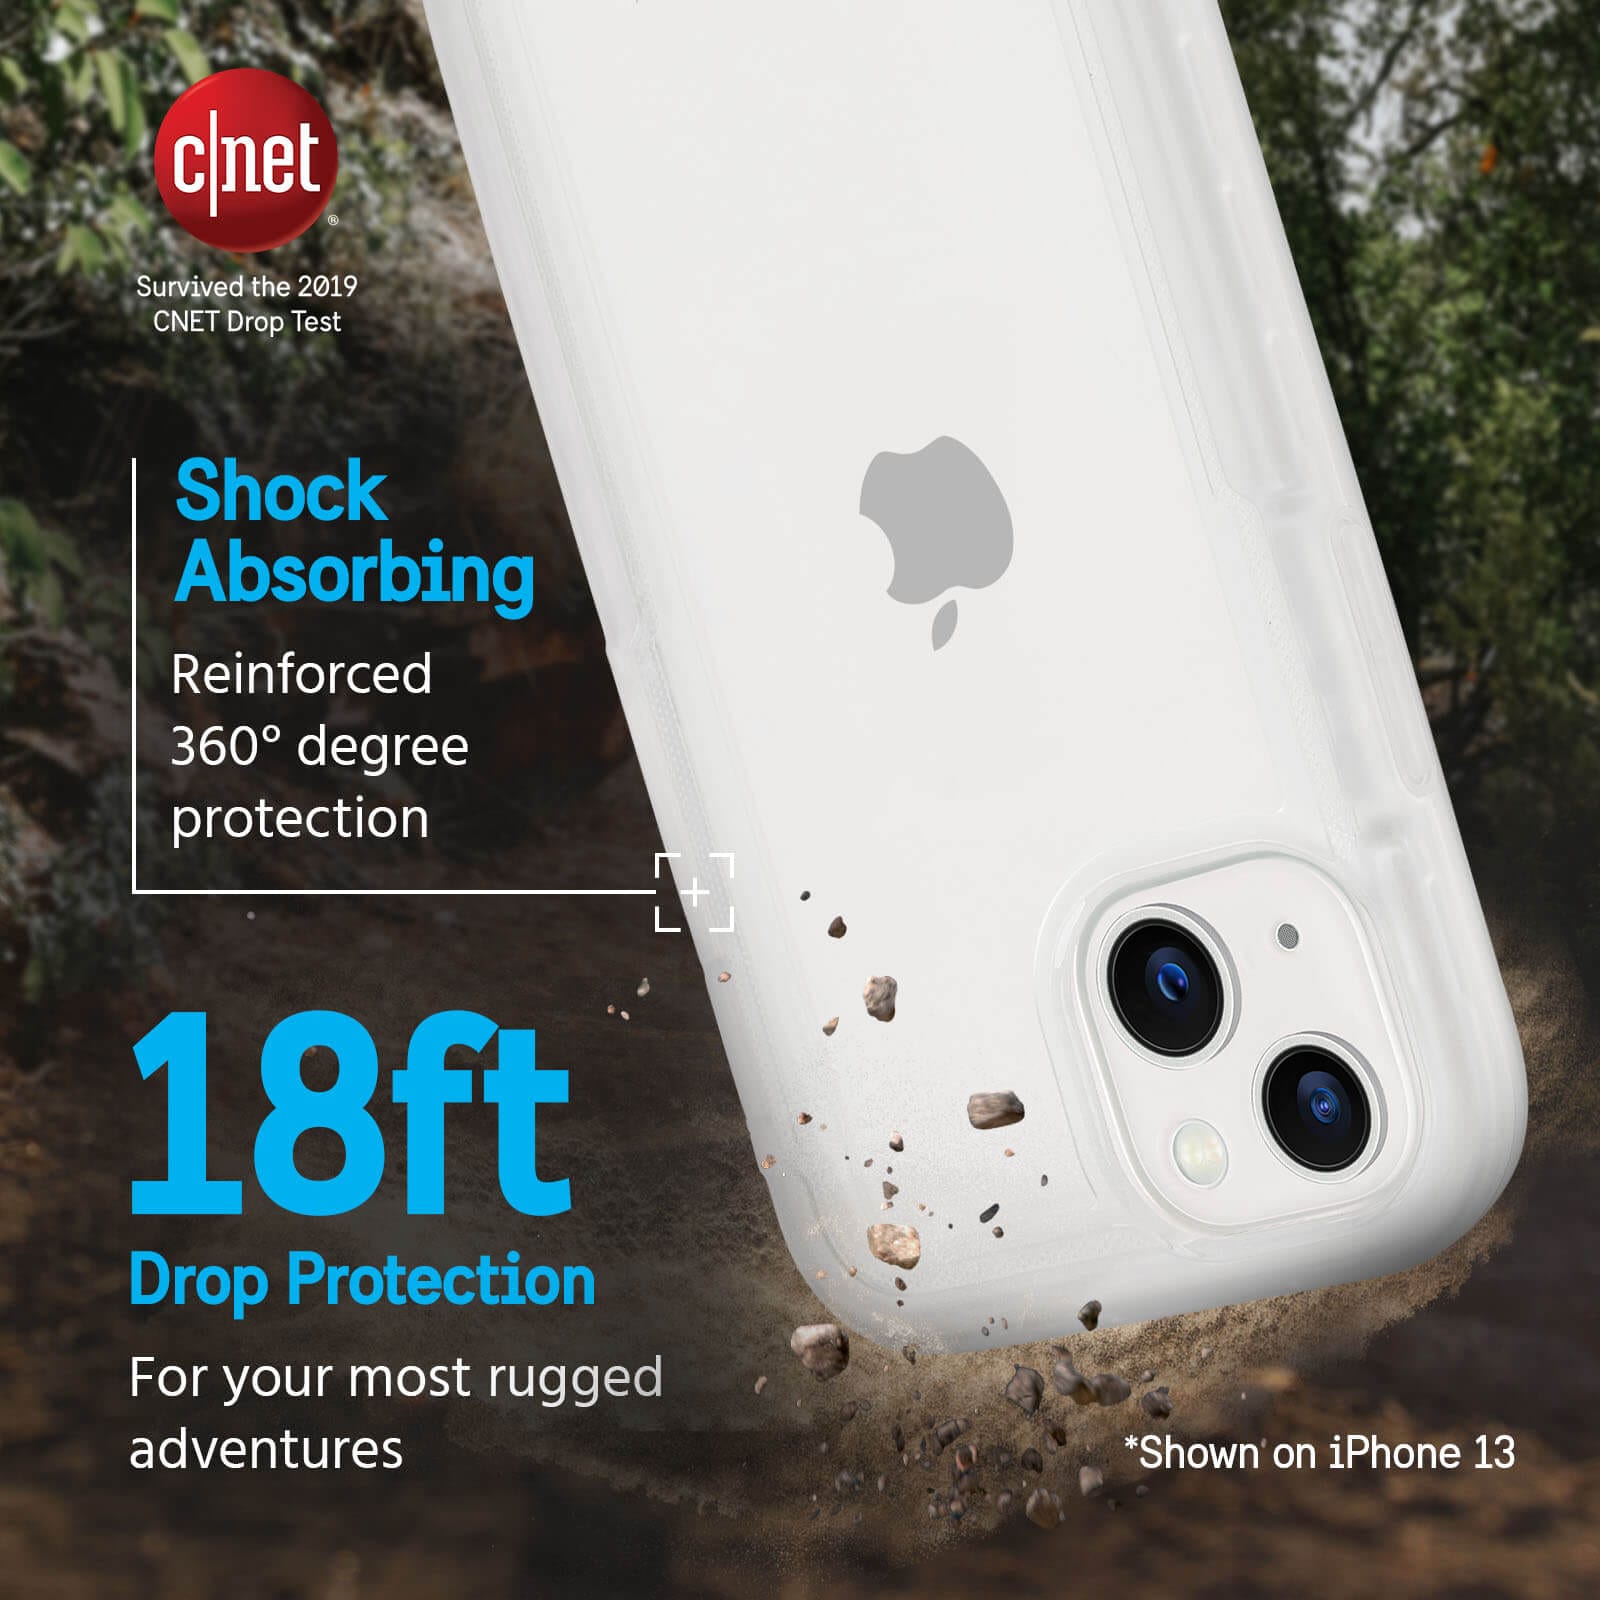 Survived the CNET 2019 drop Test. Shock absorbing reinforced 360 degree protection. 18ft Drop Protection, For your most rugged adventures. color::Clear